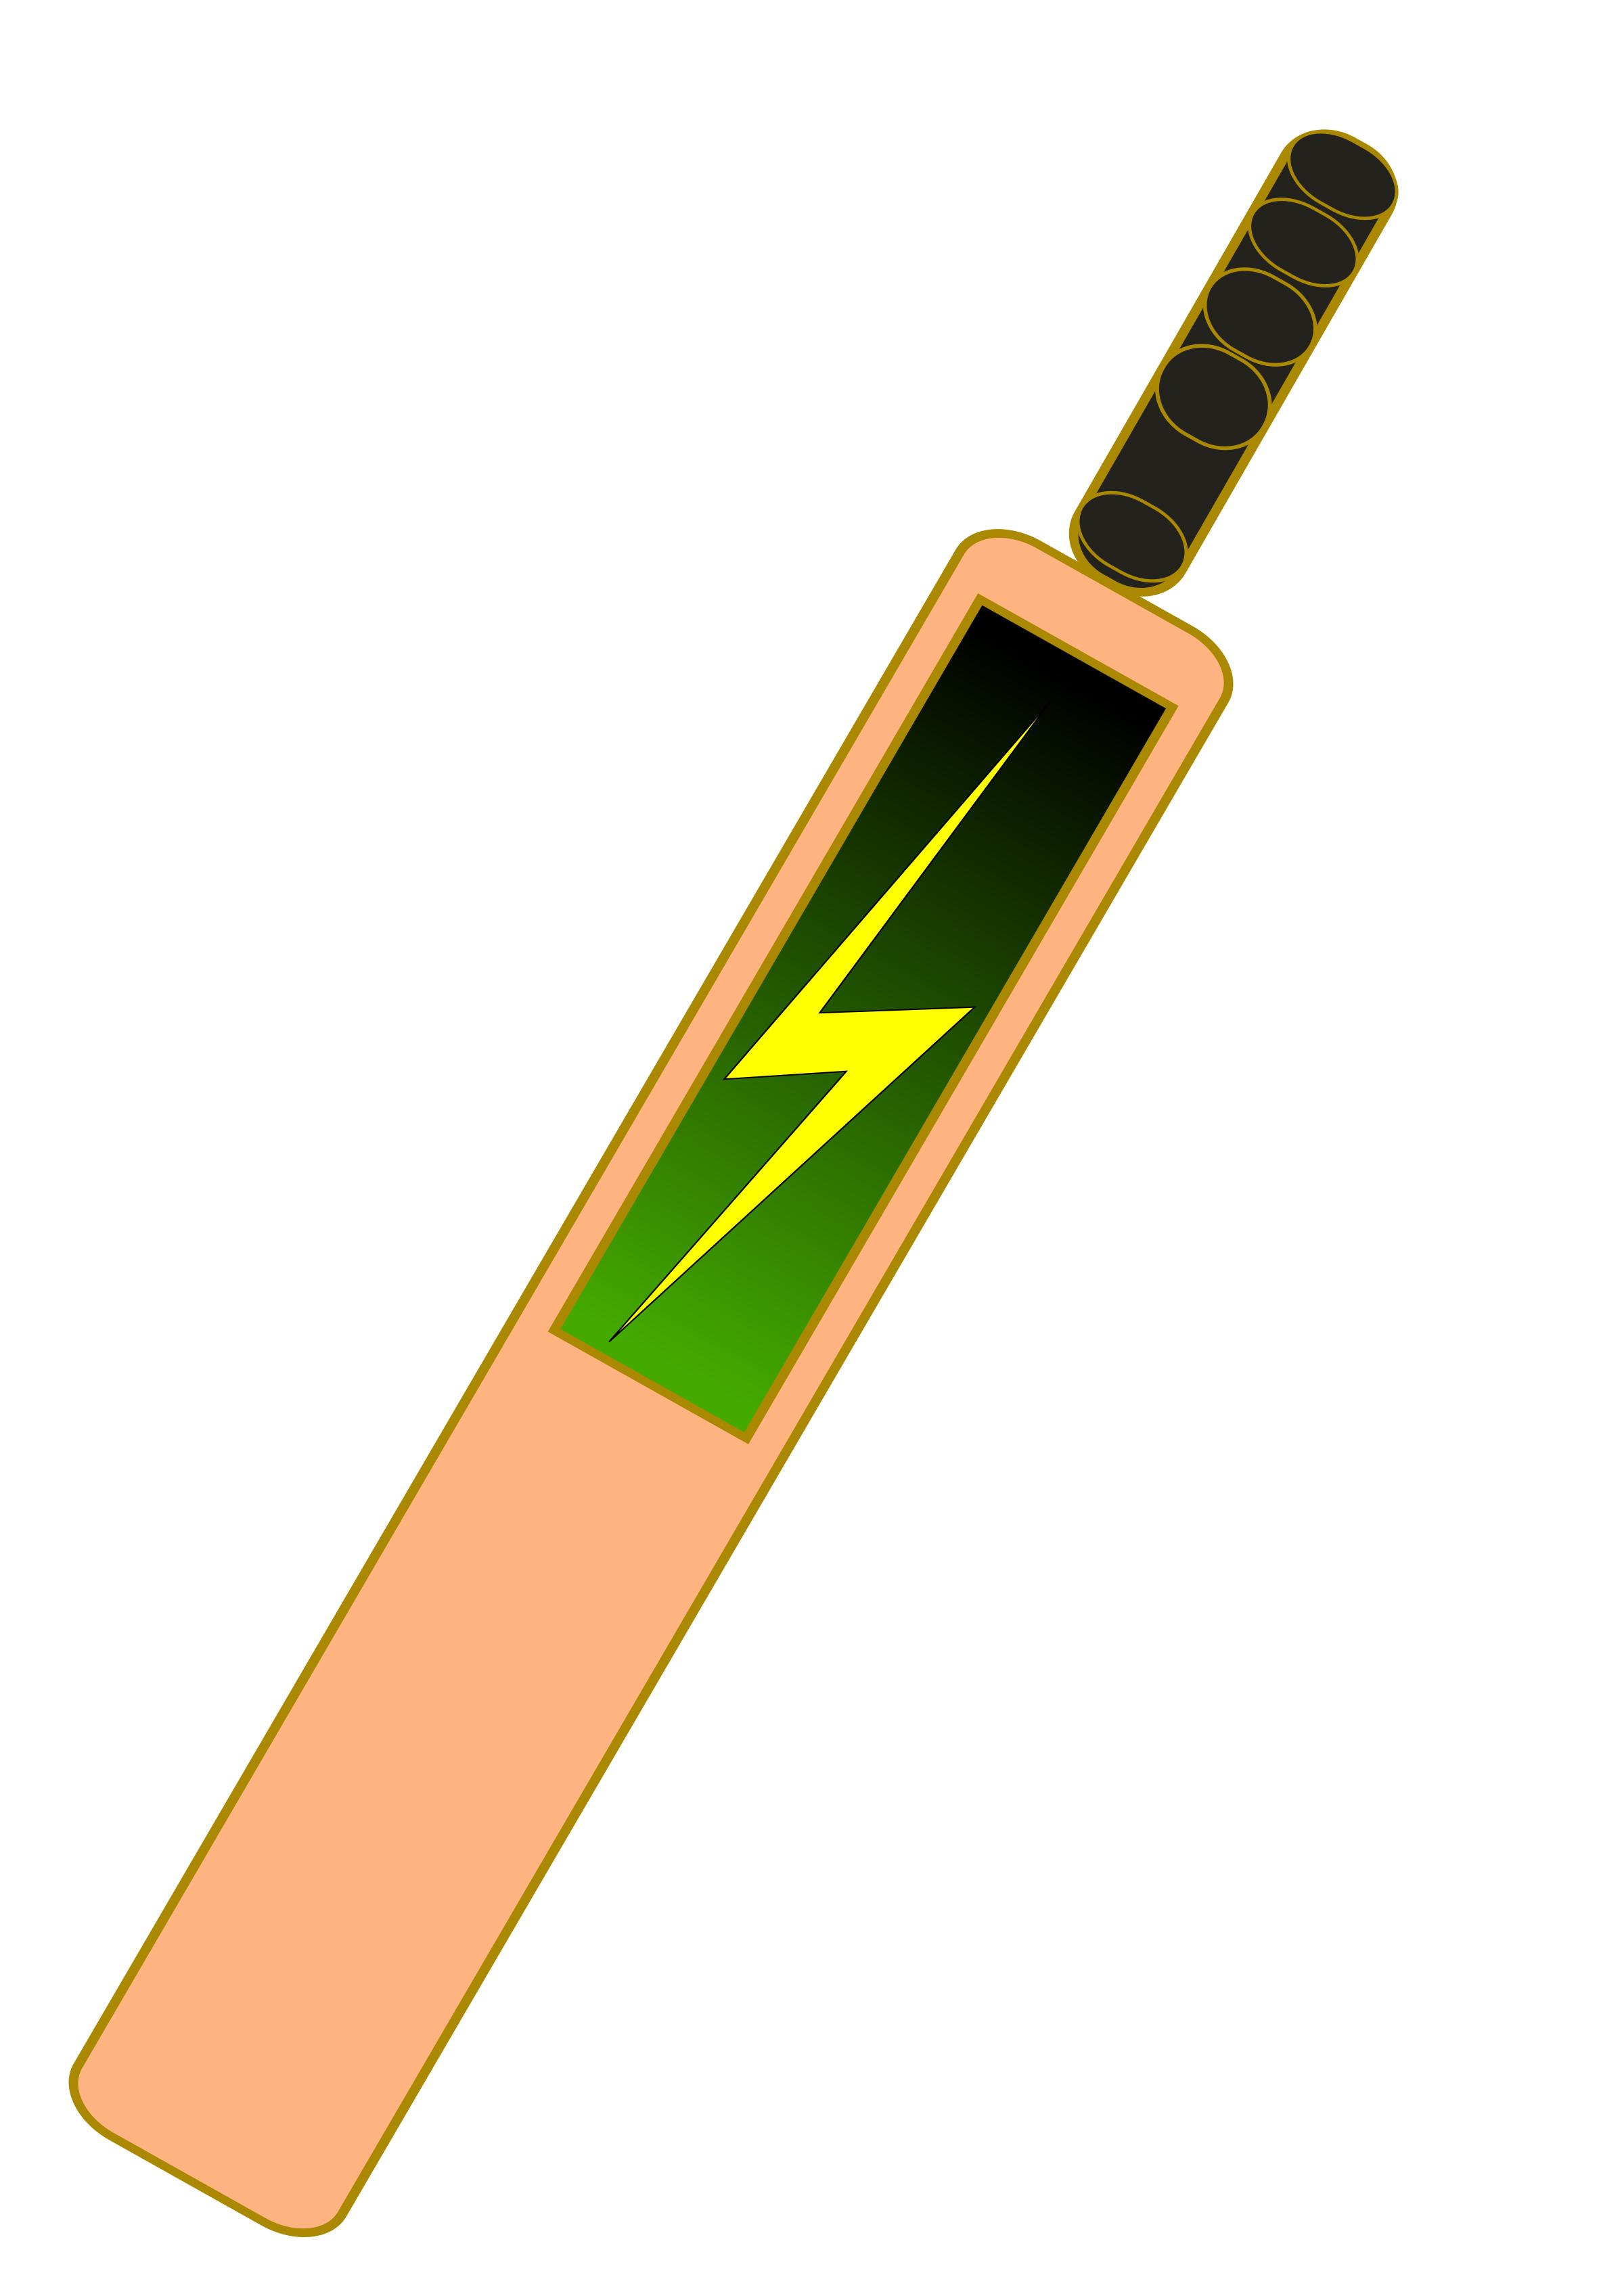 Cricketer's Power! png